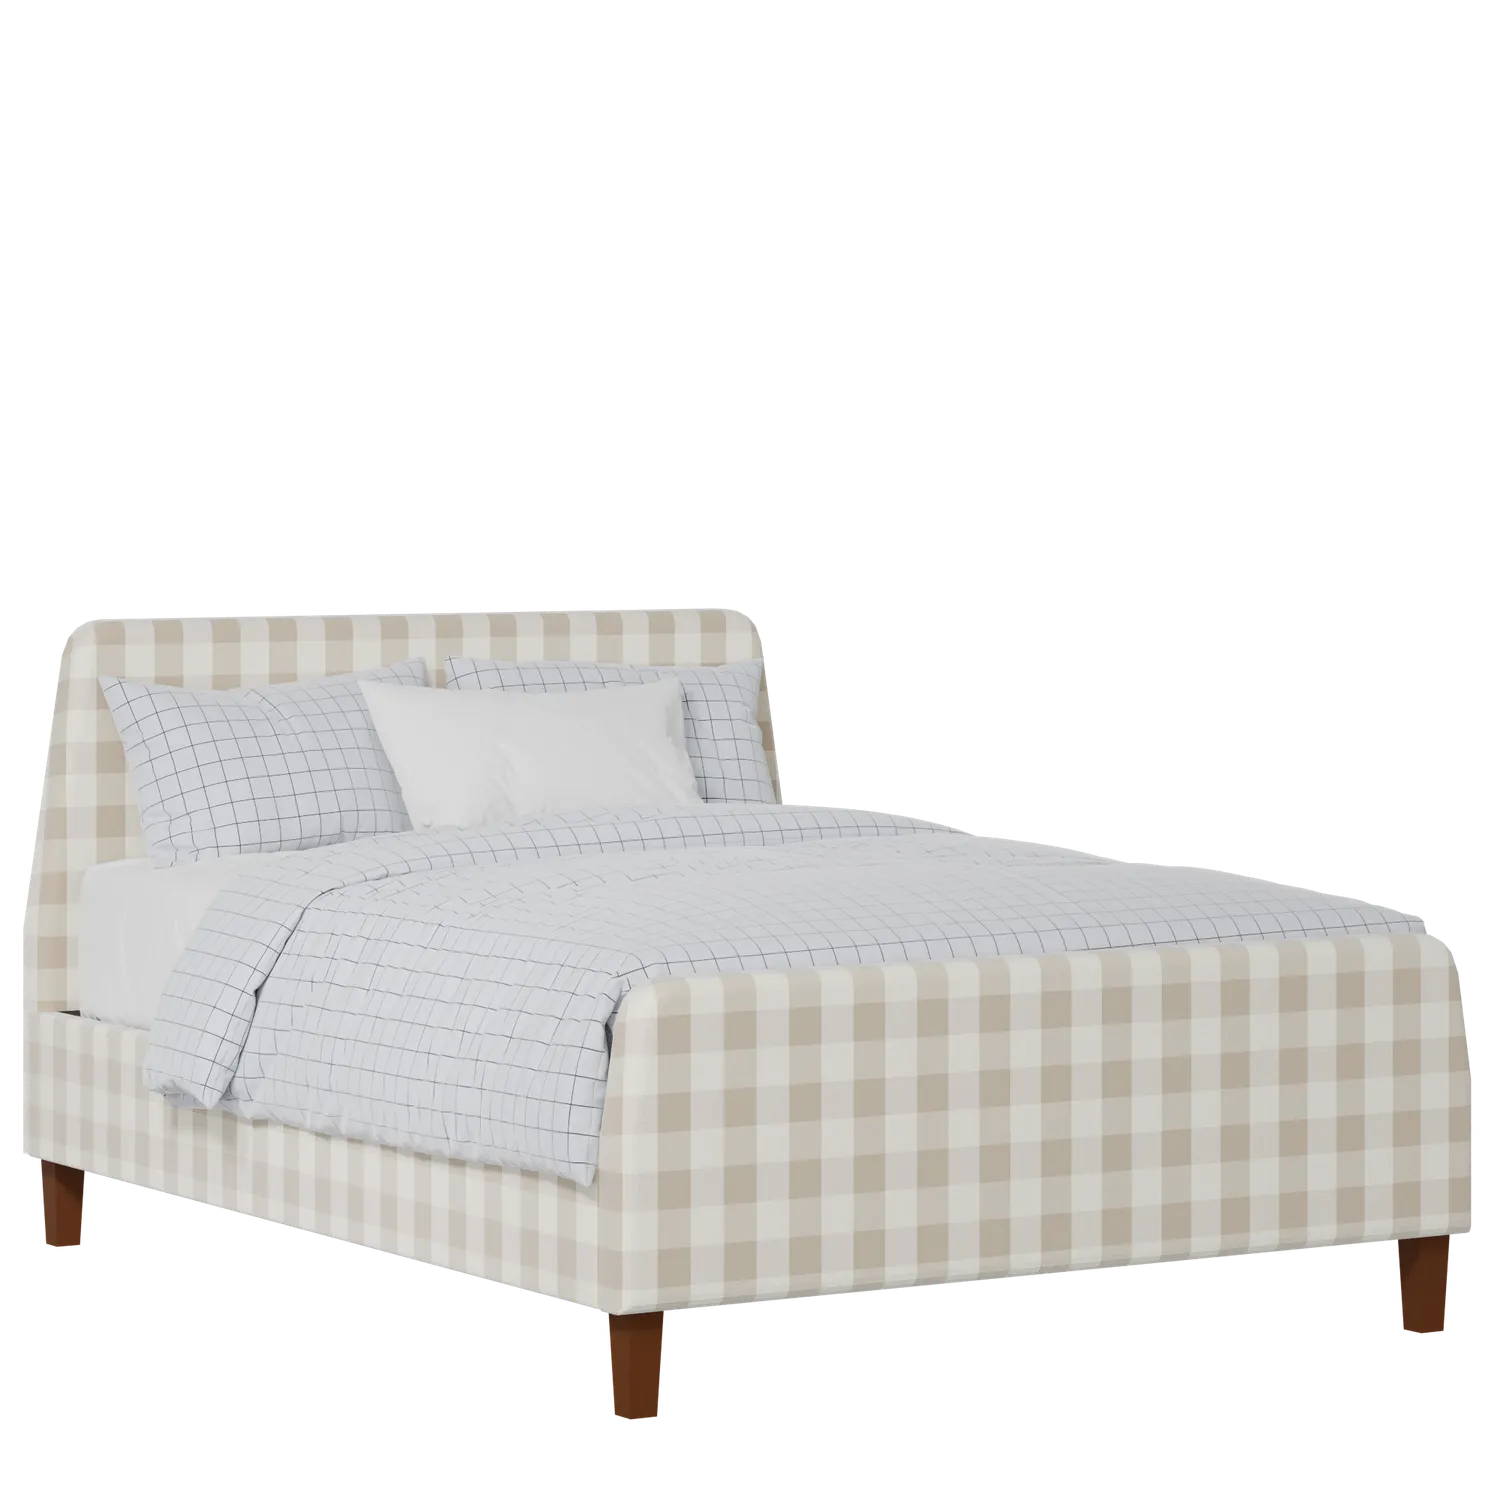 Hanwell upholstered bed in Romo Kemble Putty fabric with Juno mattress